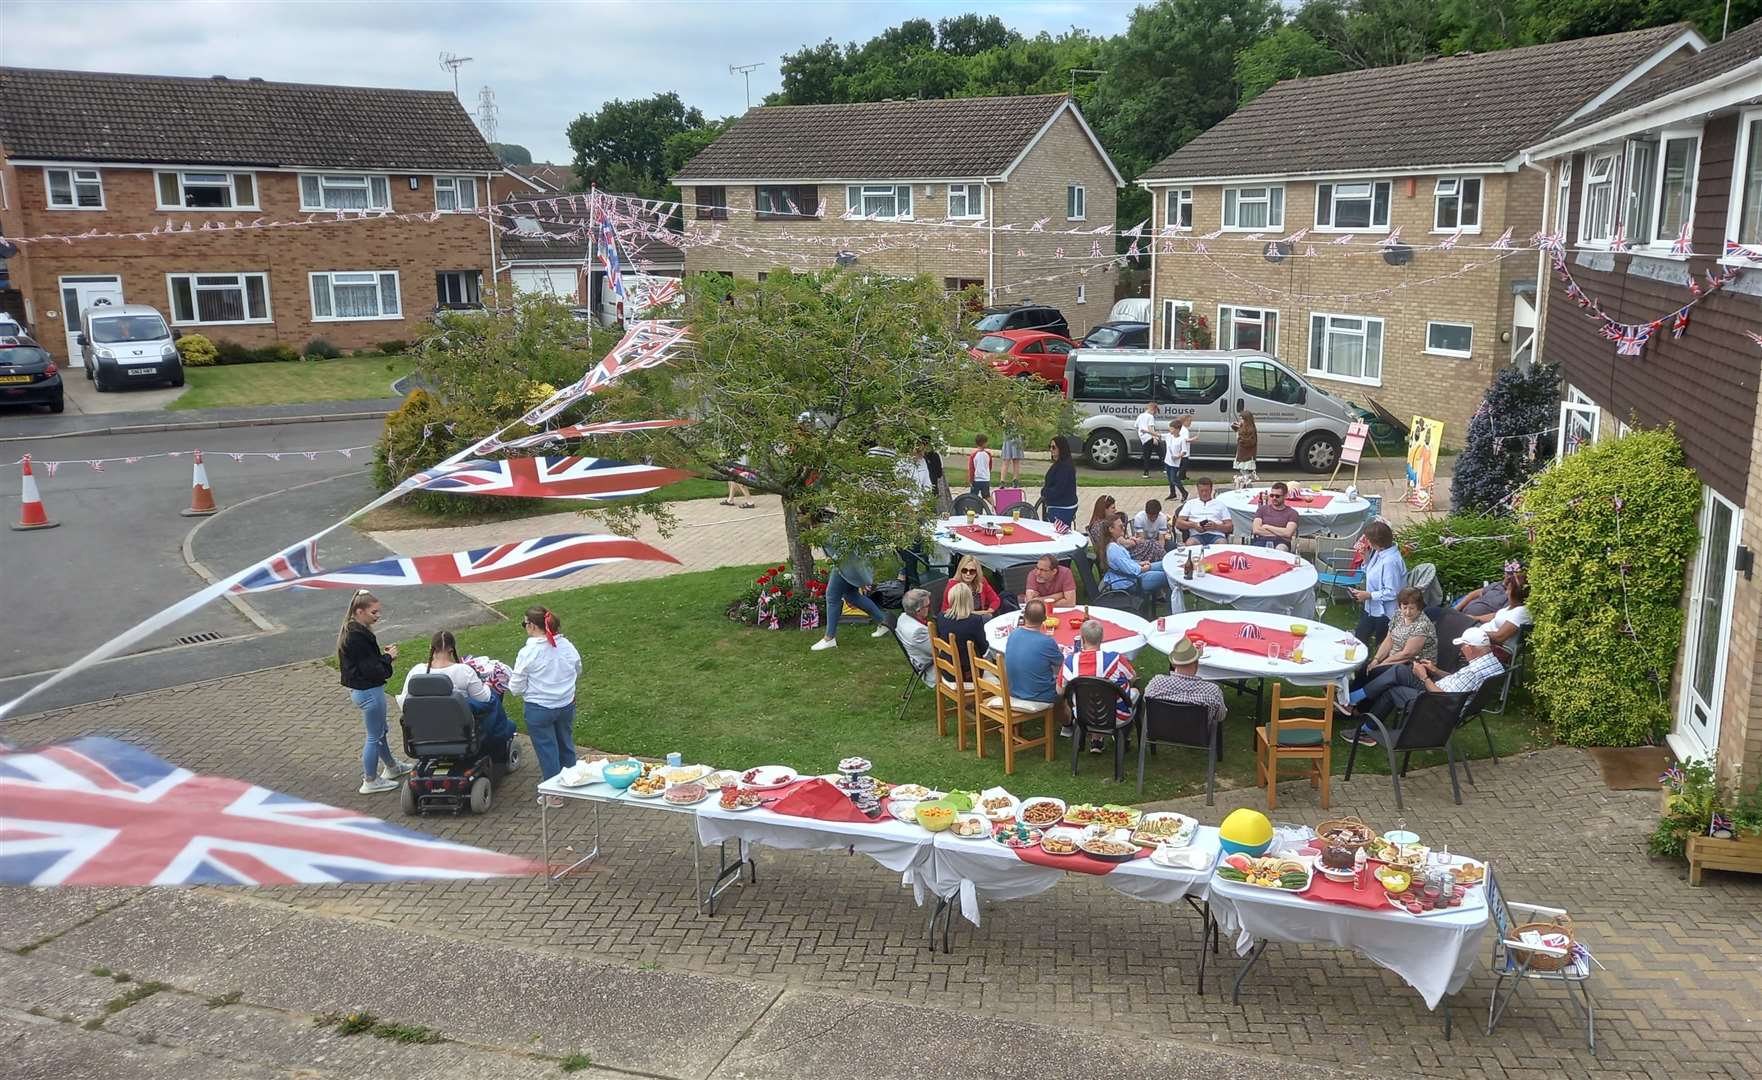 Has your street discussed holding a coronation street party?